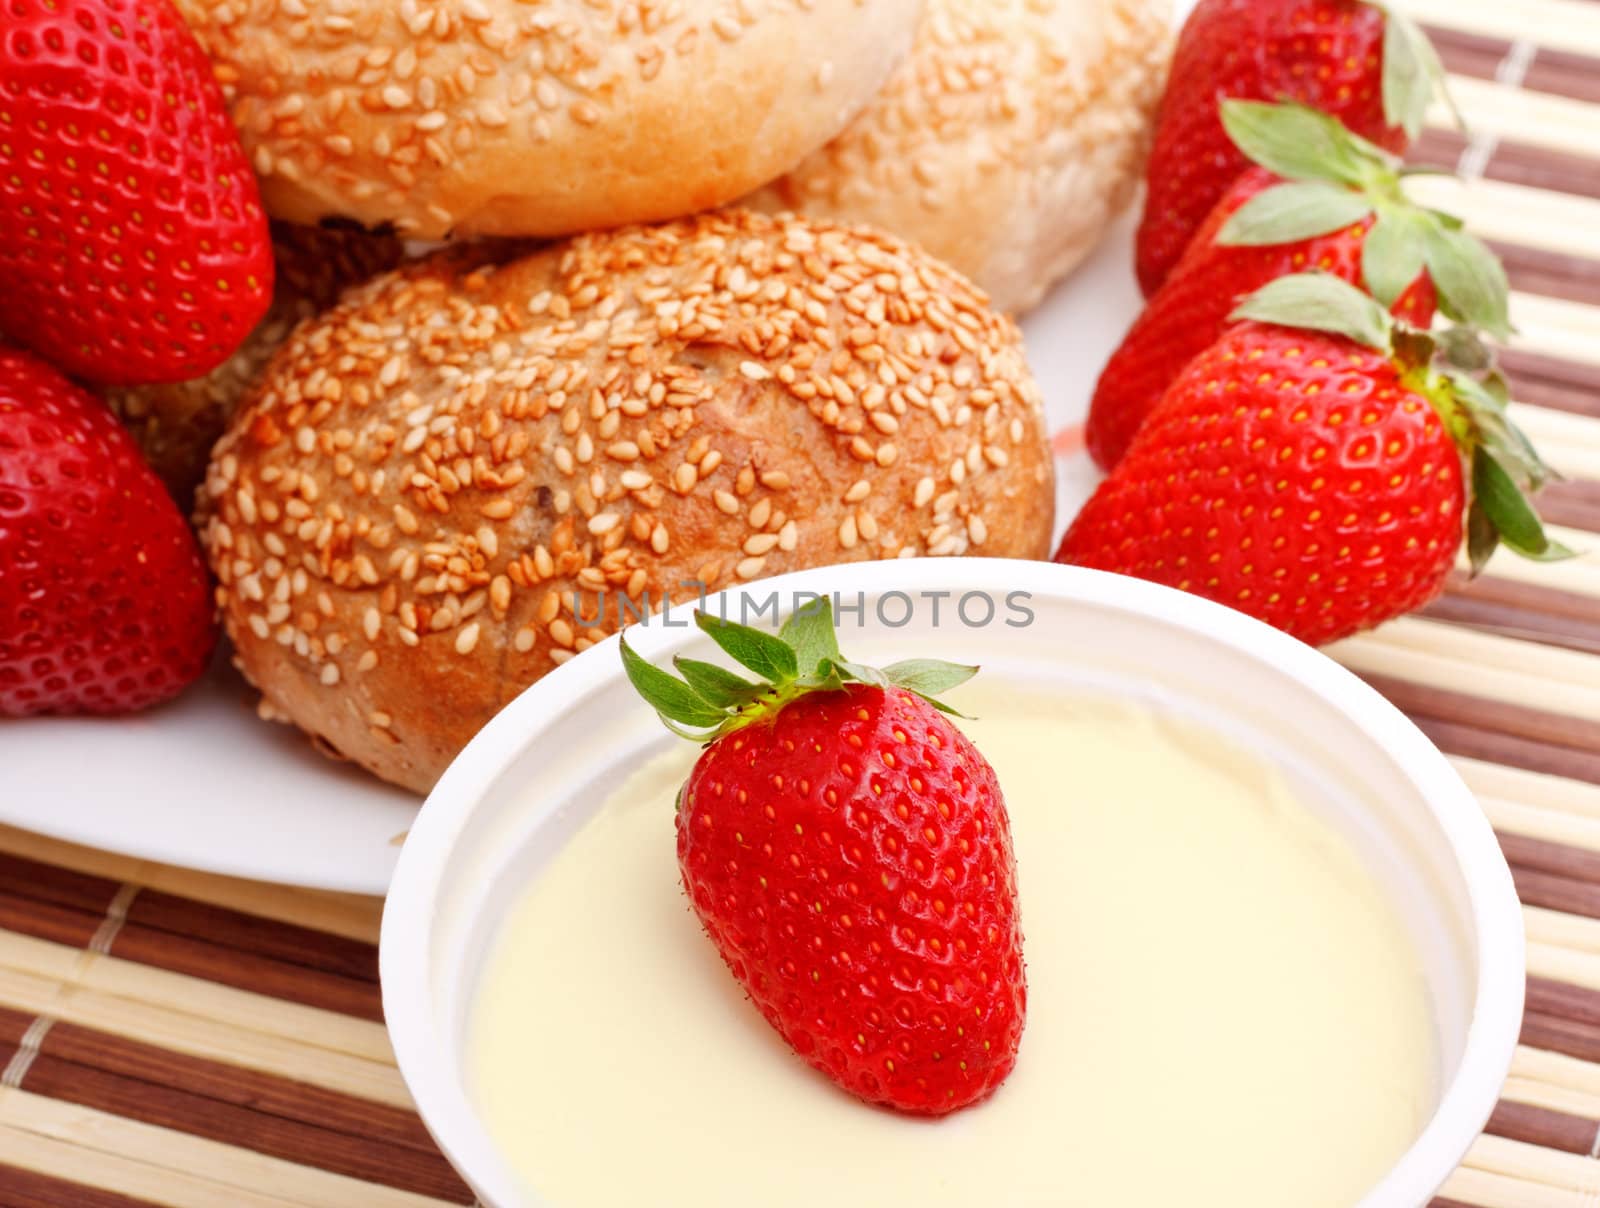 breakfast with buns, strawberry and sour cream